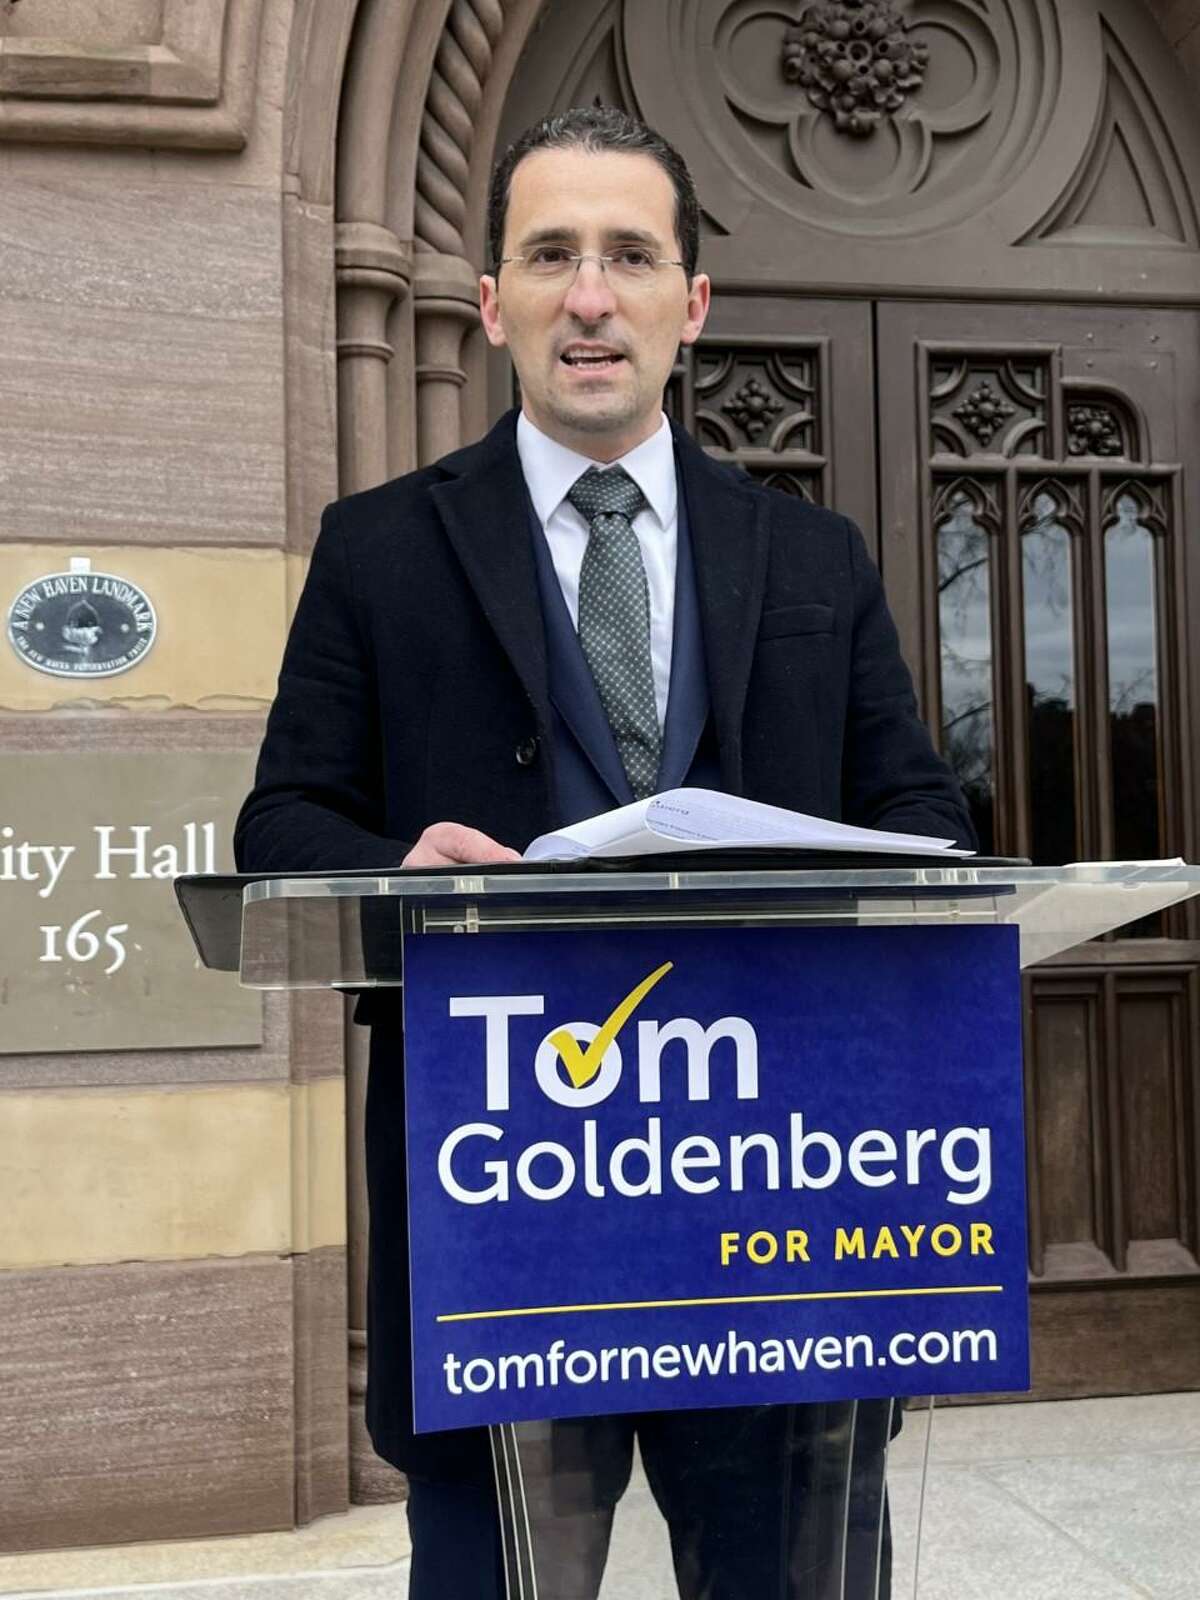 New Haven Democratic mayoral candidate Tom Goldenberg speaks at a City Hall press conference on Tuesday, Jan. 10, 2023.